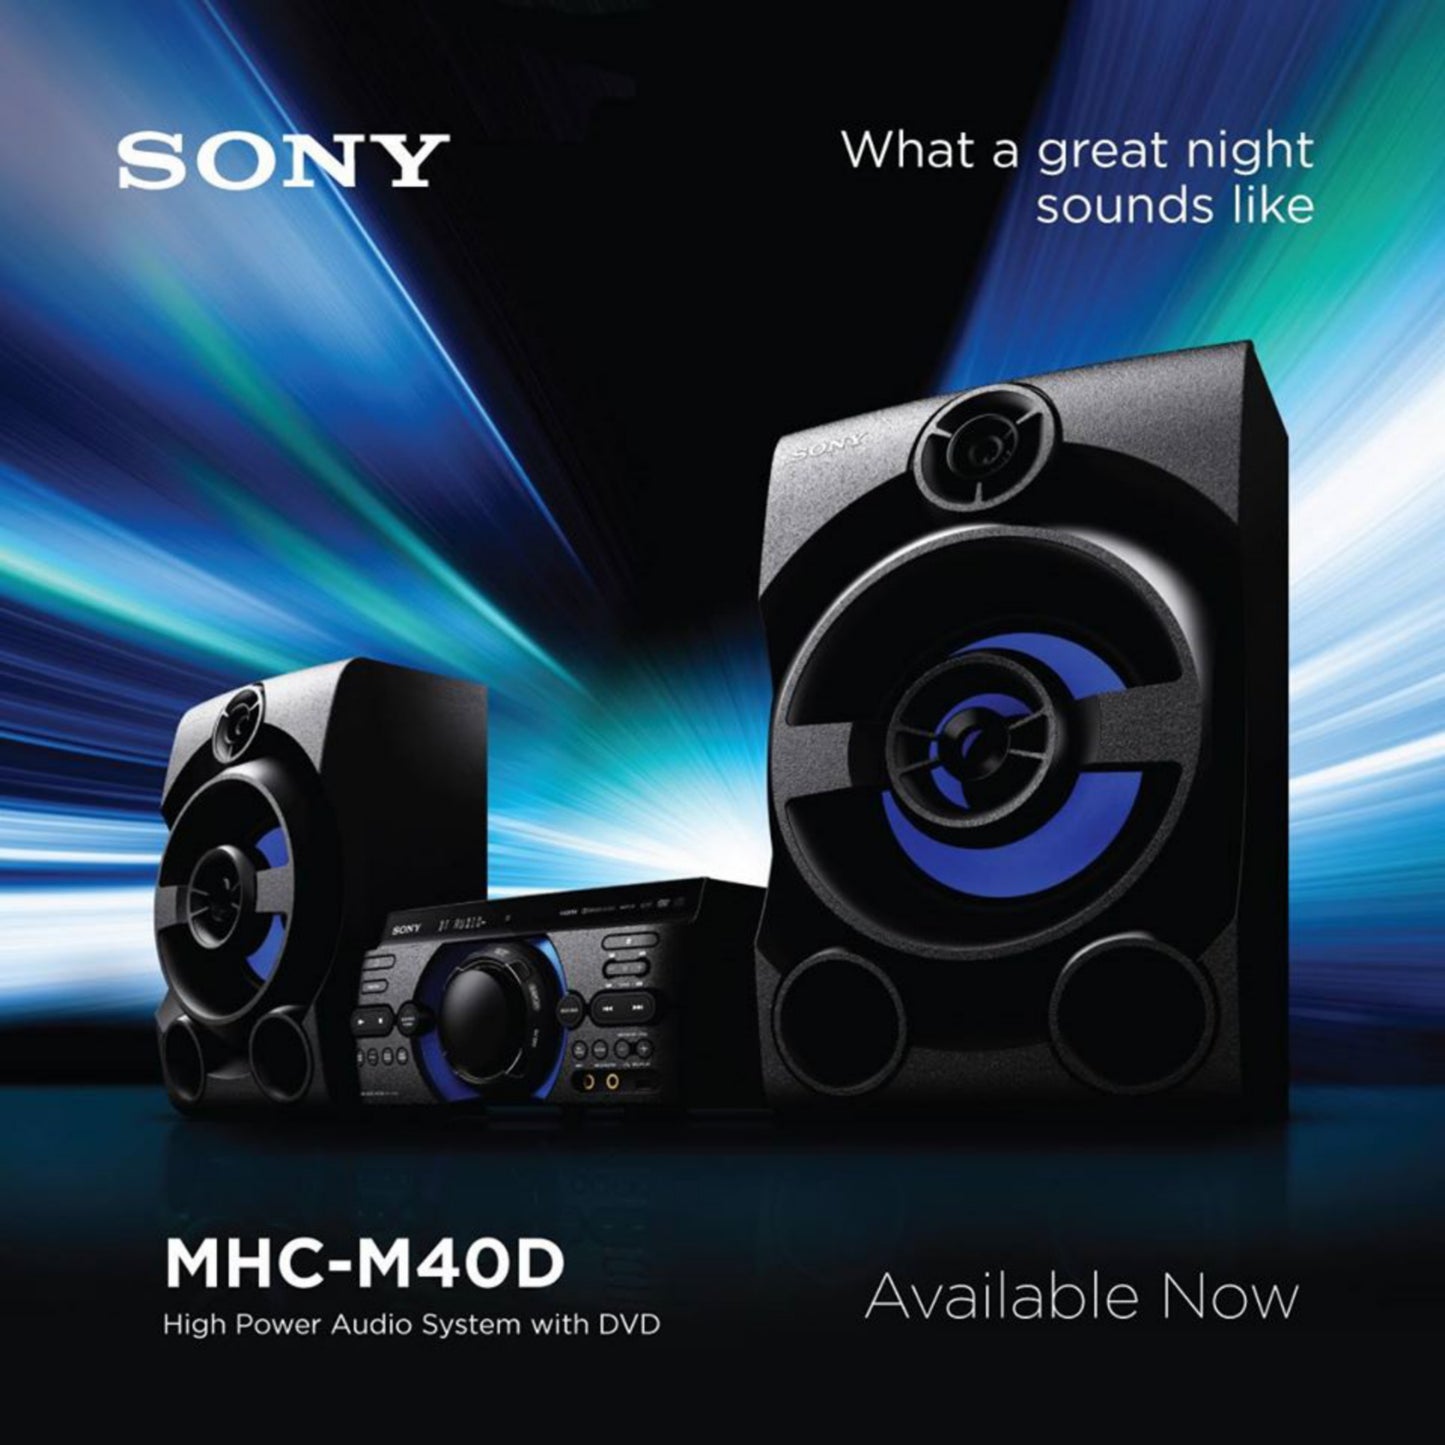 Sony MHC-M40D High Power Audio System with DVD, USB, Bluetooth - Brand New